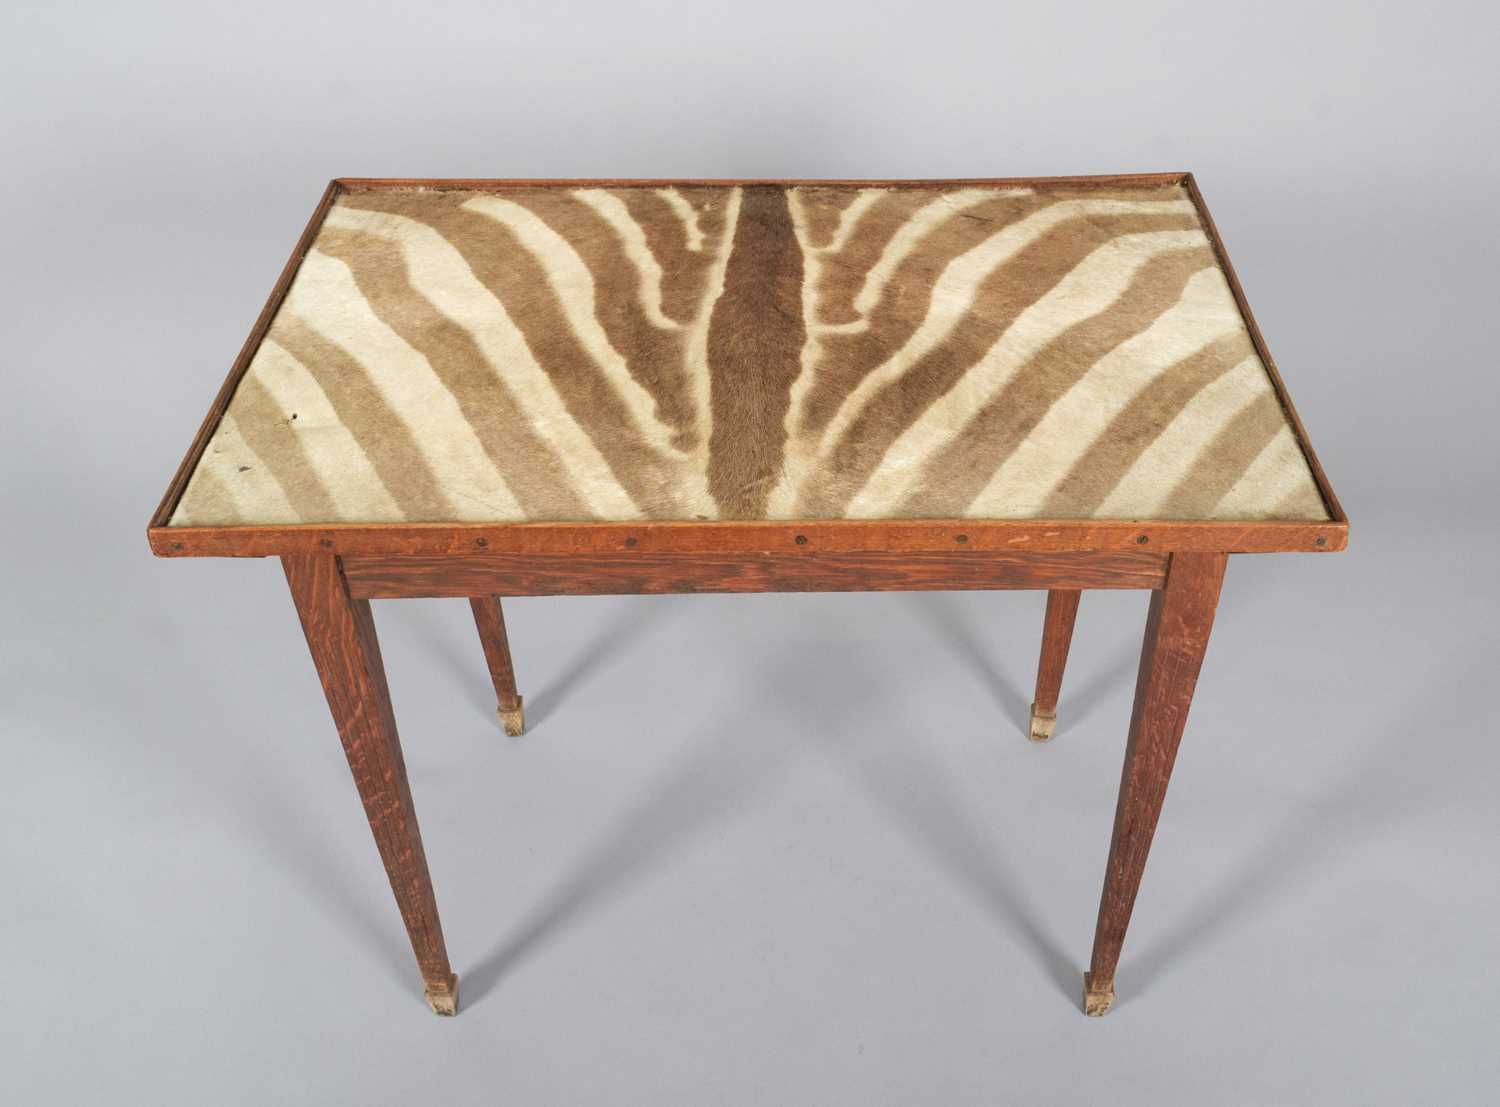 Animal Furniture: A Plains Zebra Hide Bridge Table, by Rowland Ward Ltd, 167 Piccadilly, London, the - Image 2 of 5